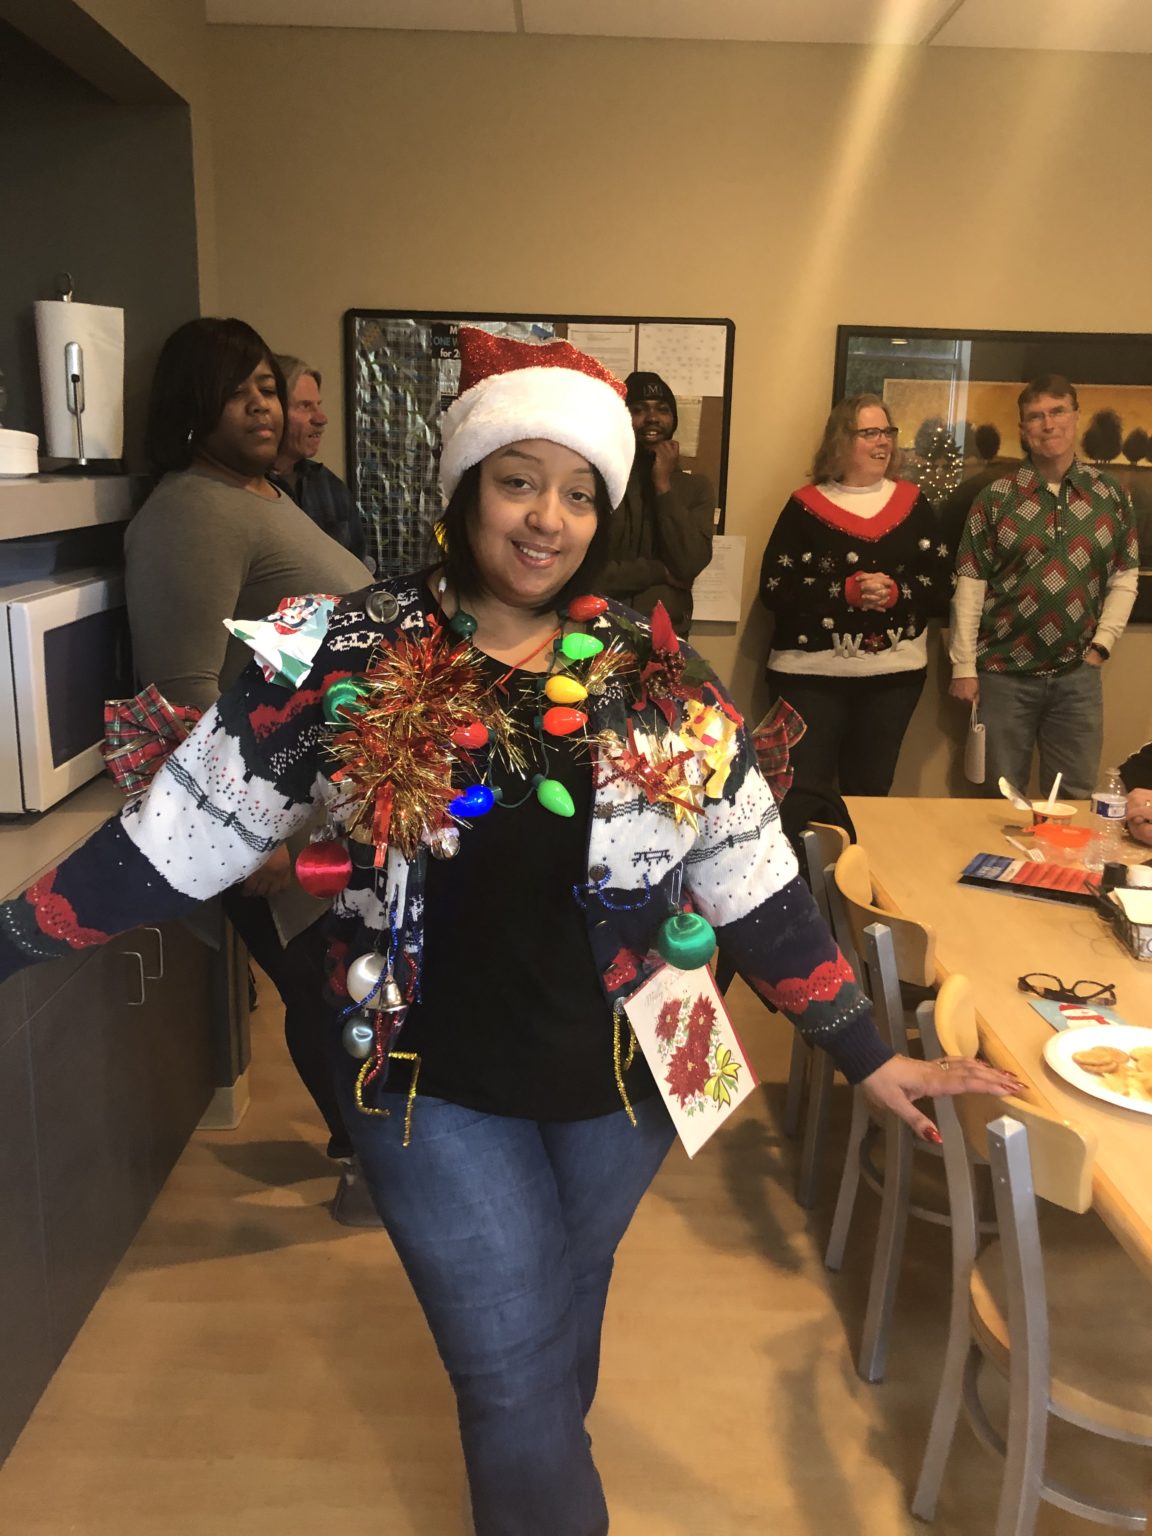 Congratulations to Our Ugly Christmas Sweater Contest Winners!